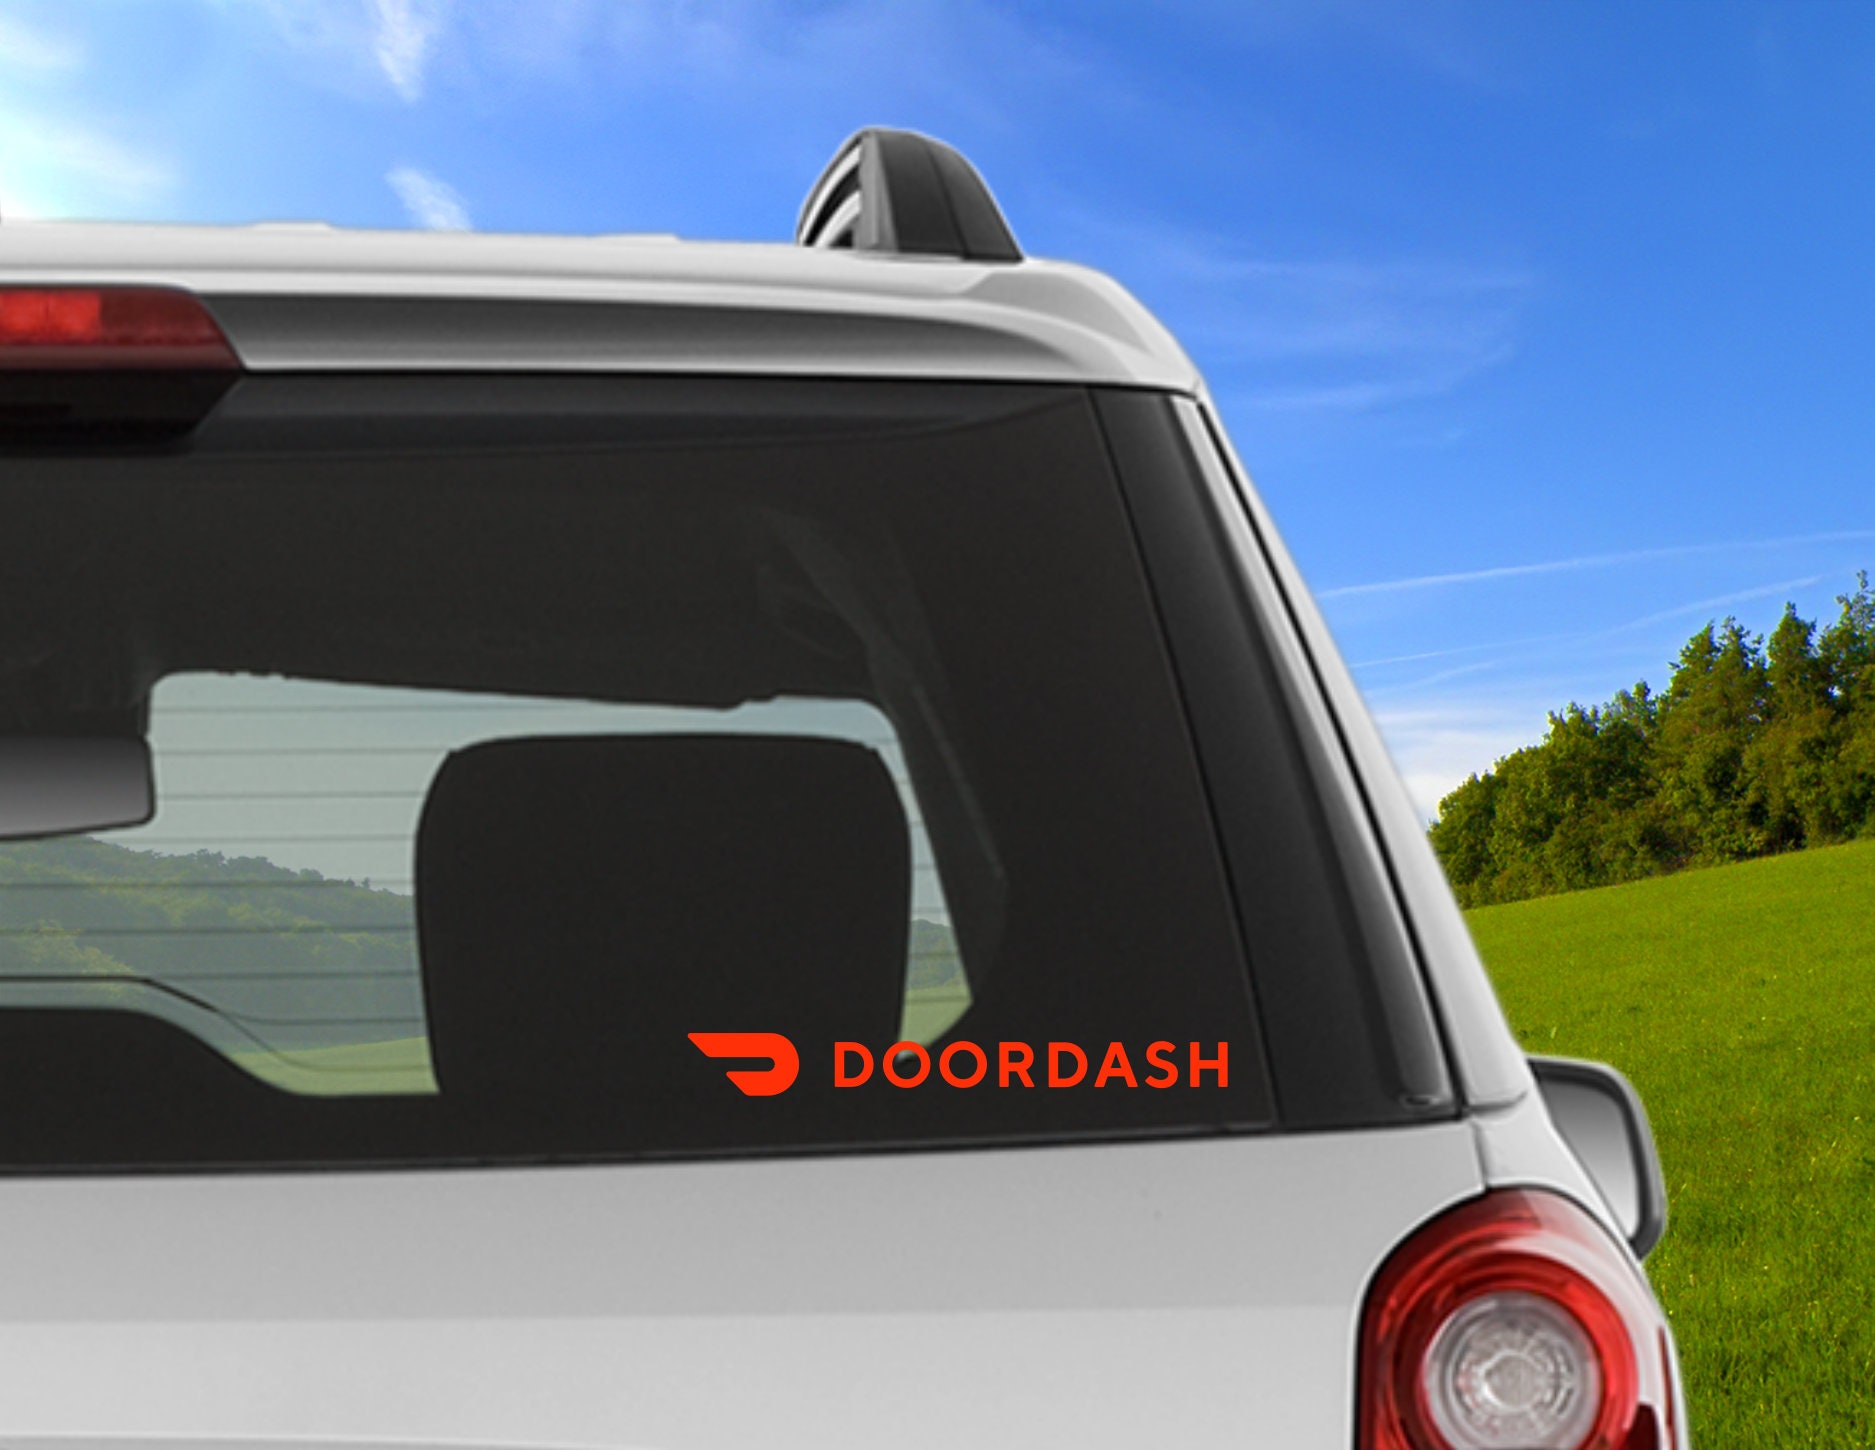  GEEKBEAR Car Magnet (2 Pack) - doordash driver Car Sign with  Doordash Logo - Reflective Waterproof Bumper Sign – No Stickers or Decals  but Magnets : Automotive